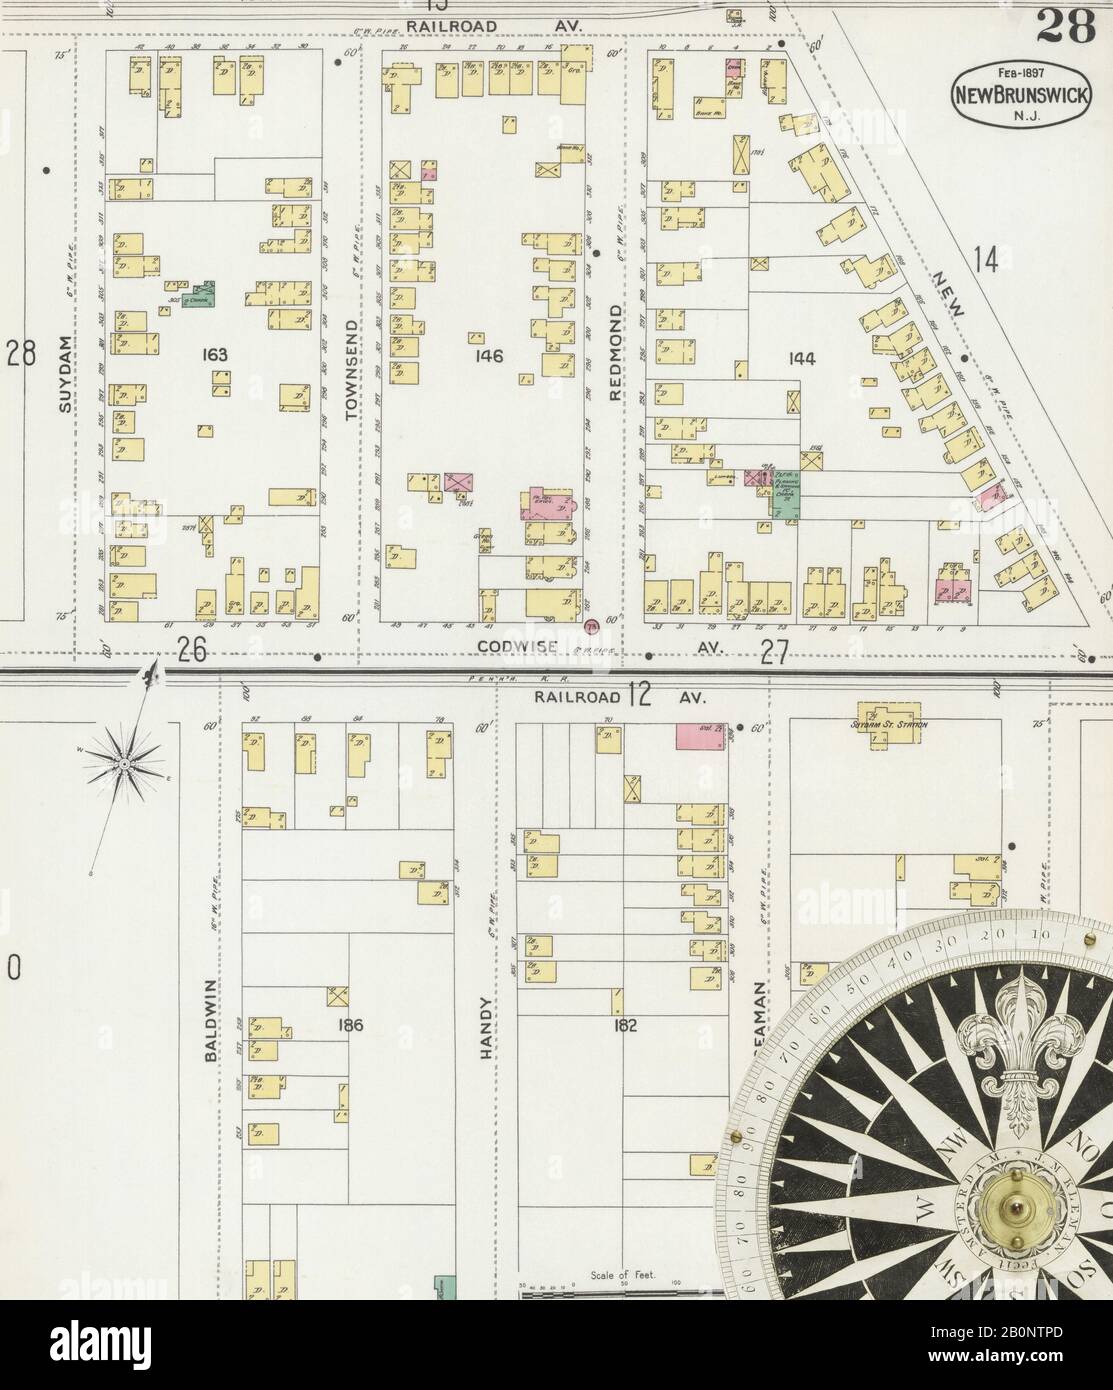 Image 29 of Sanborn Fire Insurance Map from New Brunswick, Middlesex County, New Jersey. Feb 1897. 31 Sheet(s), America, street map with a Nineteenth Century compass Stock Photo